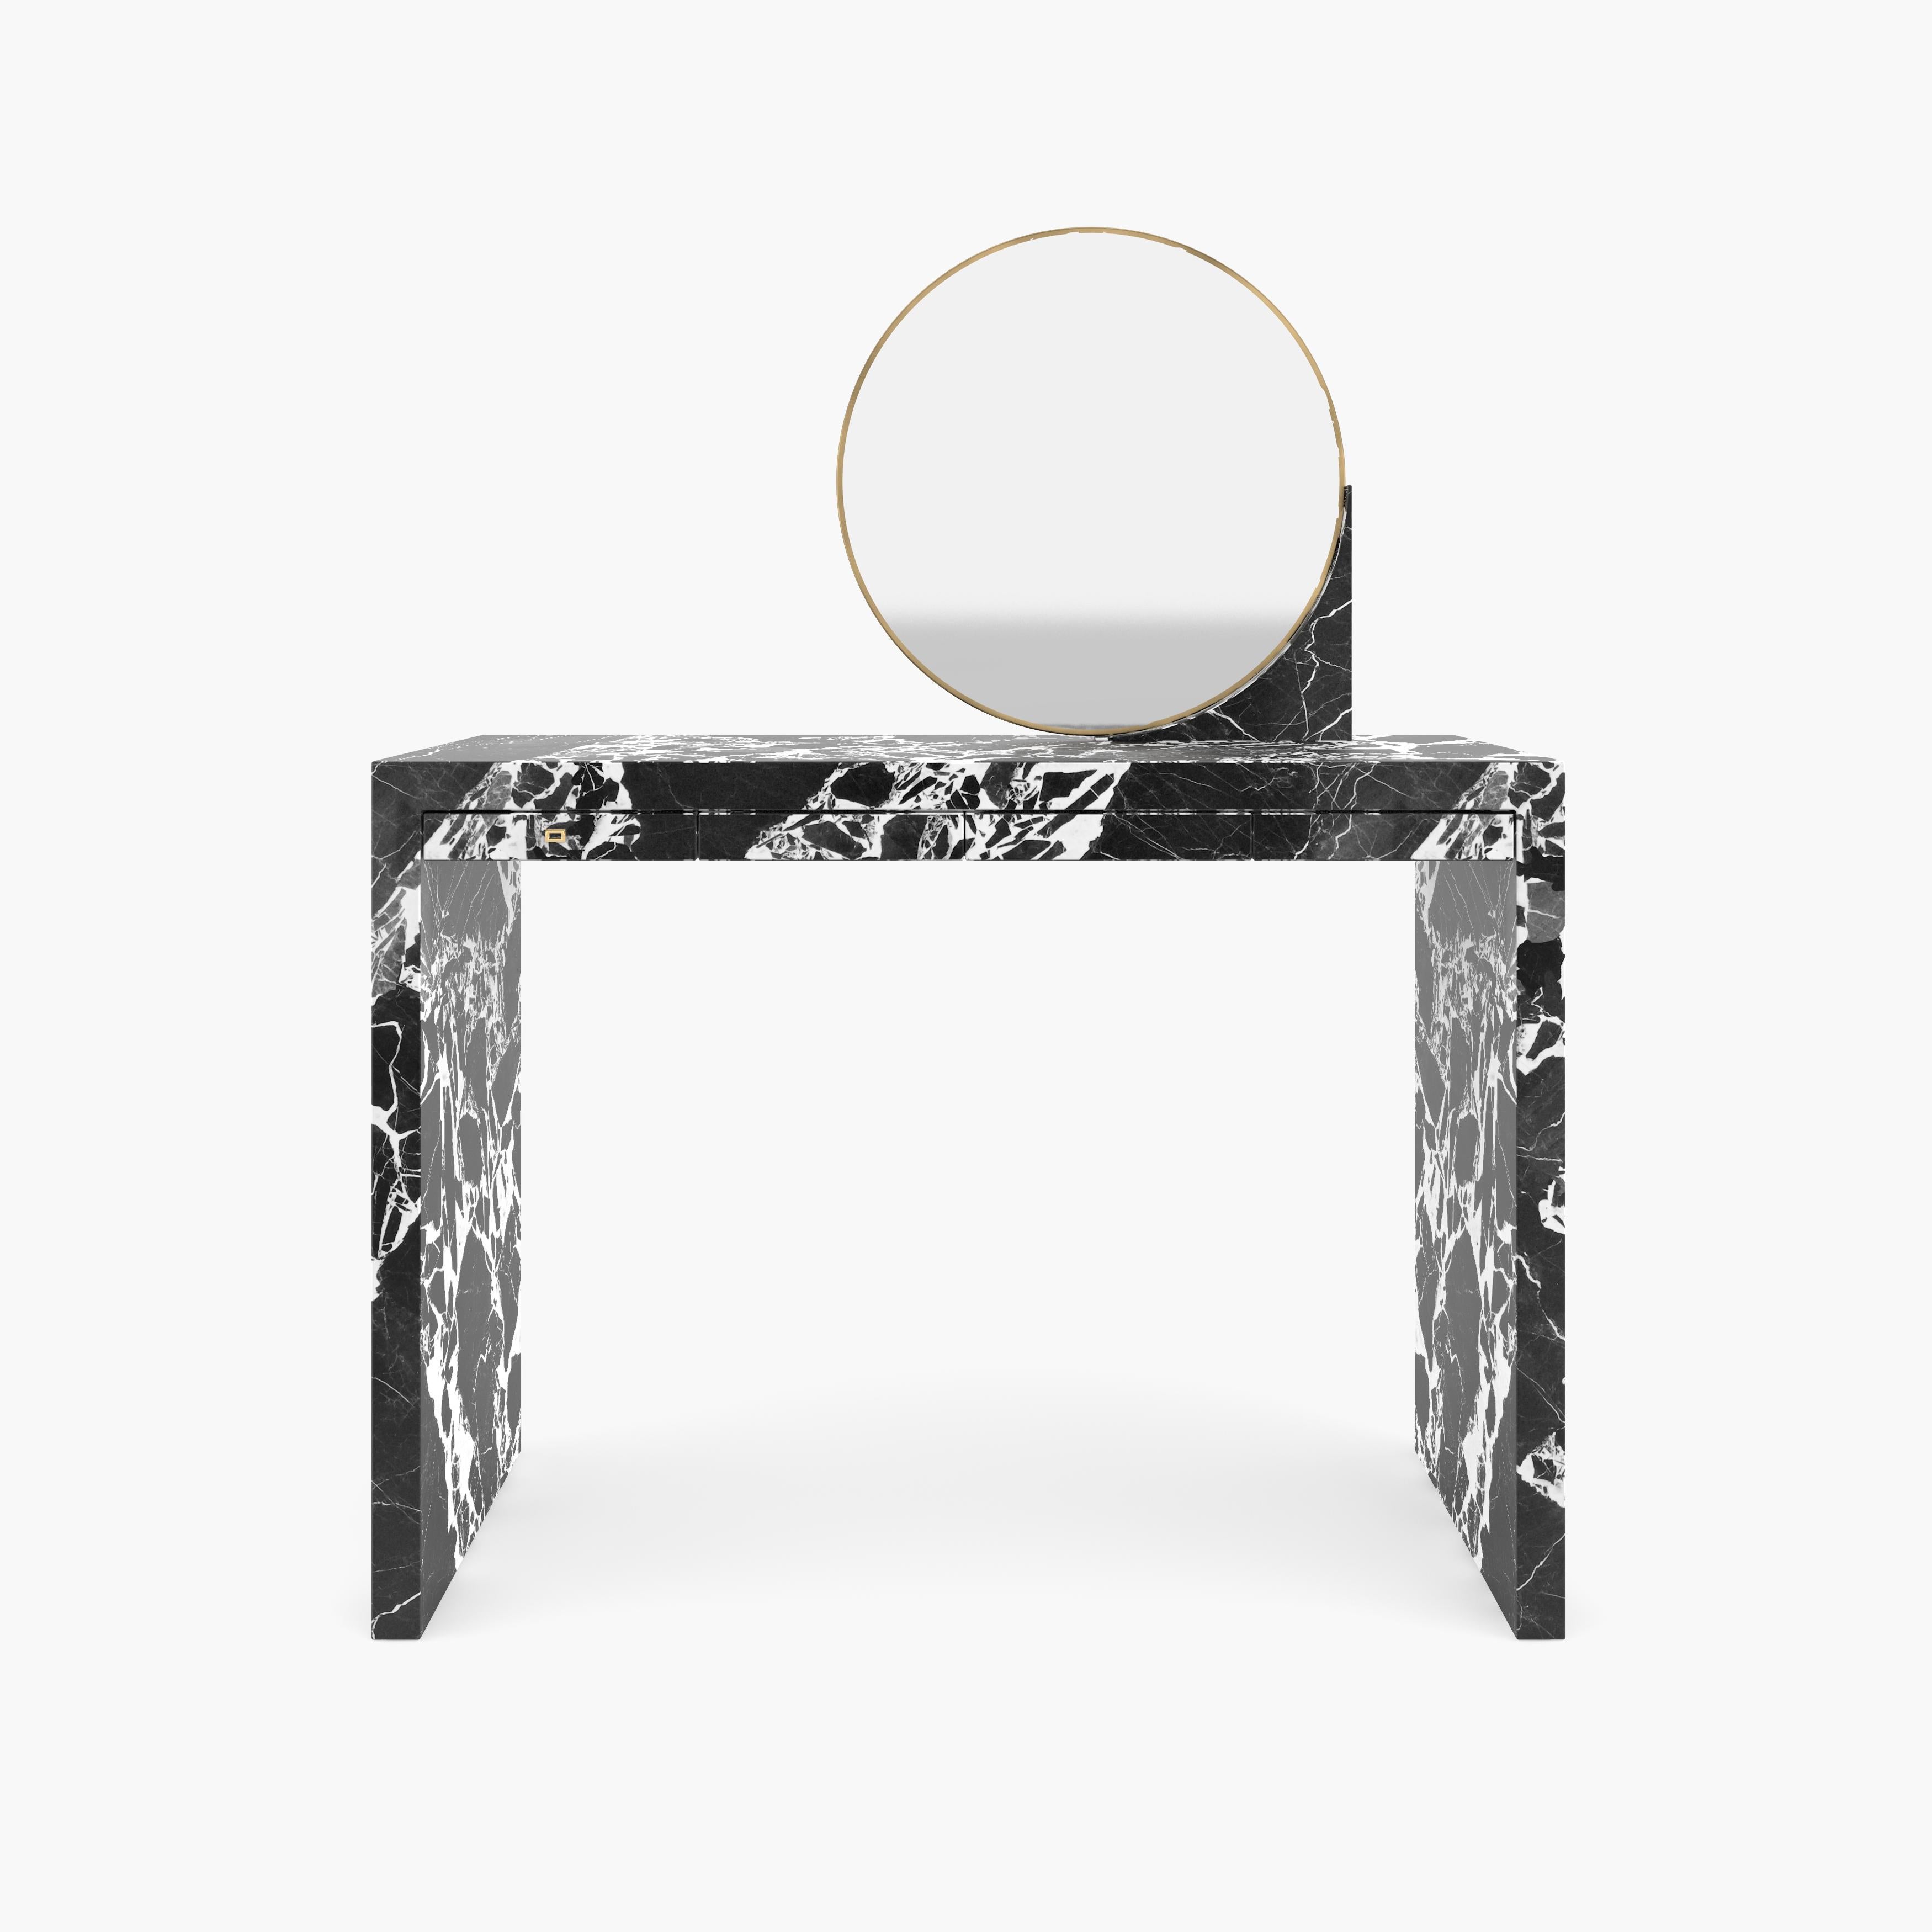 Bauhaus Console-Sideboard, 120x44x88cm Black-White Marble, Drawers, Handcrafted pc1/1 For Sale